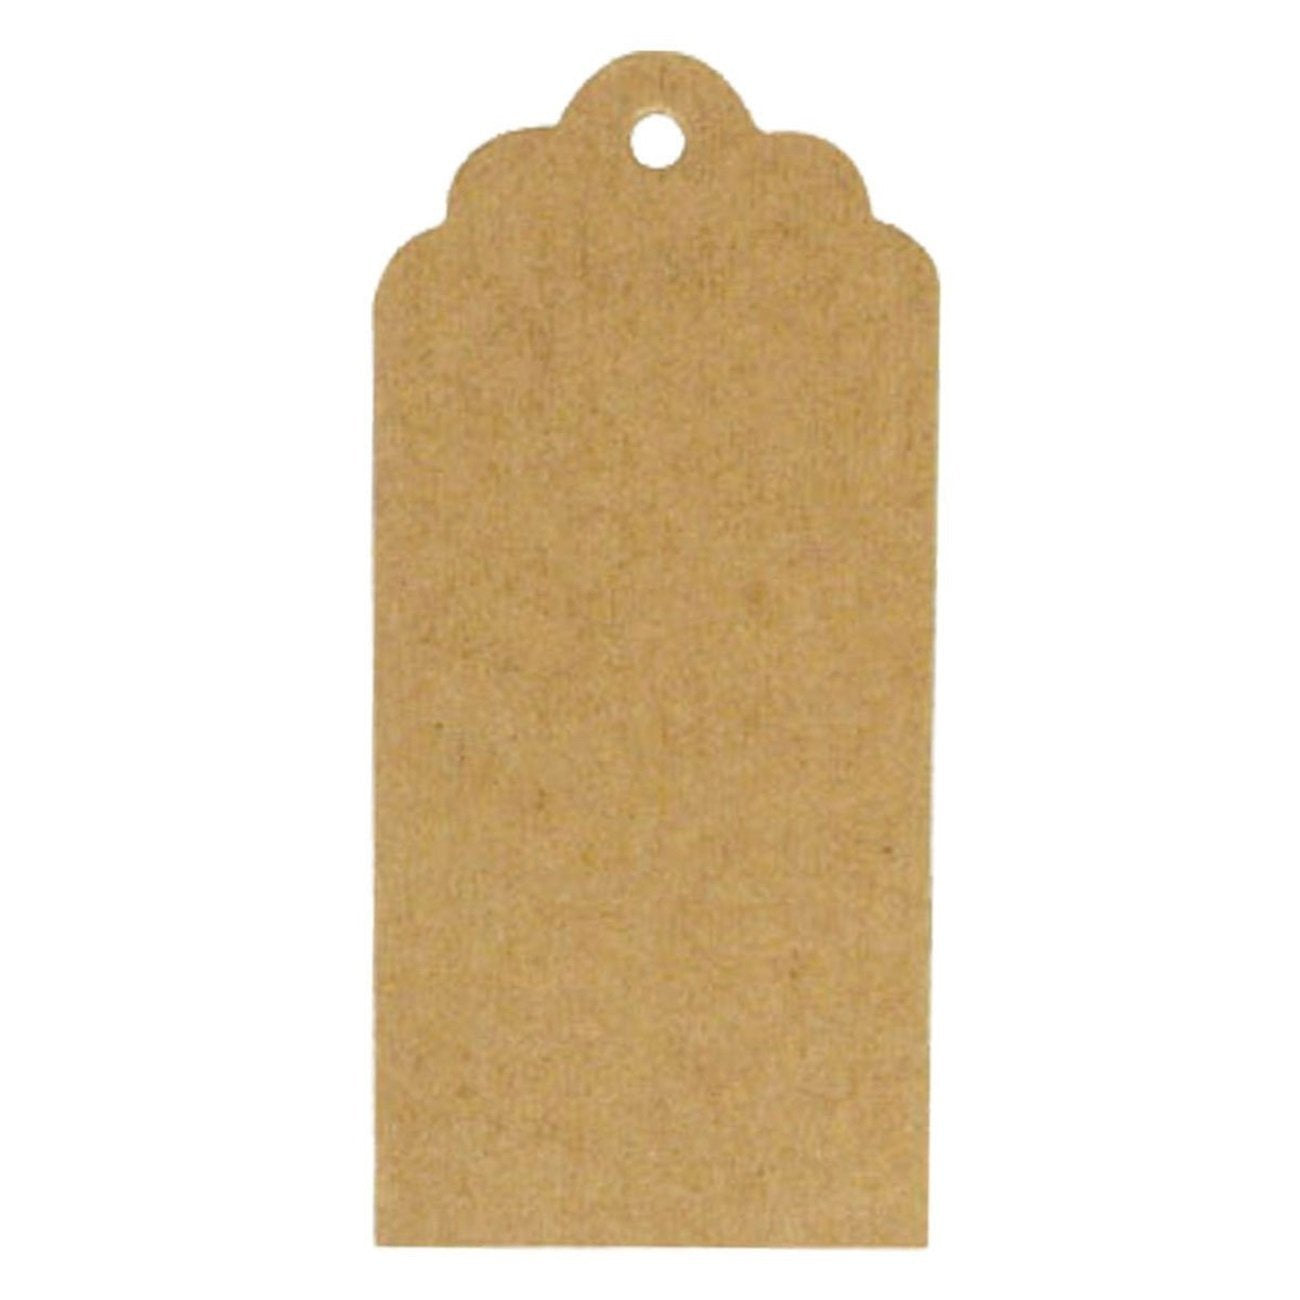 Wrapables 50 Gift Tags/Kraft Hang Tags with Free Cut Strings for Gifts, Crafts & Price Tags - Scalloped Tag